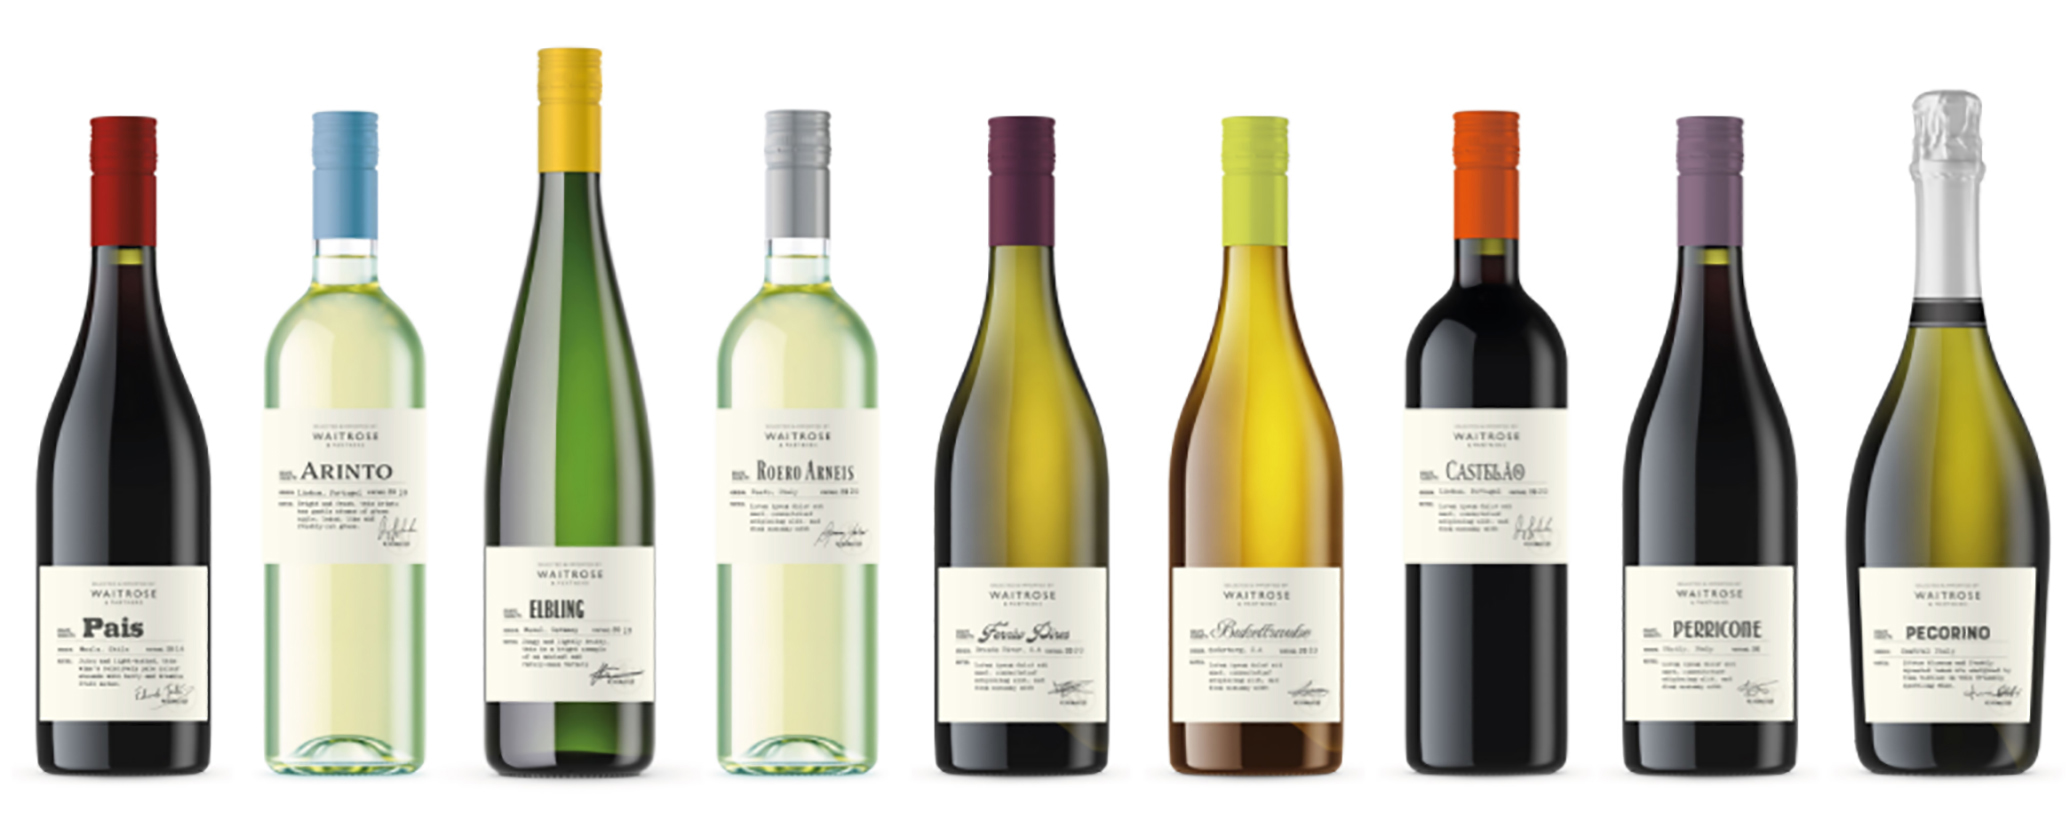 Waitrose Loved & Found range adds five new wines